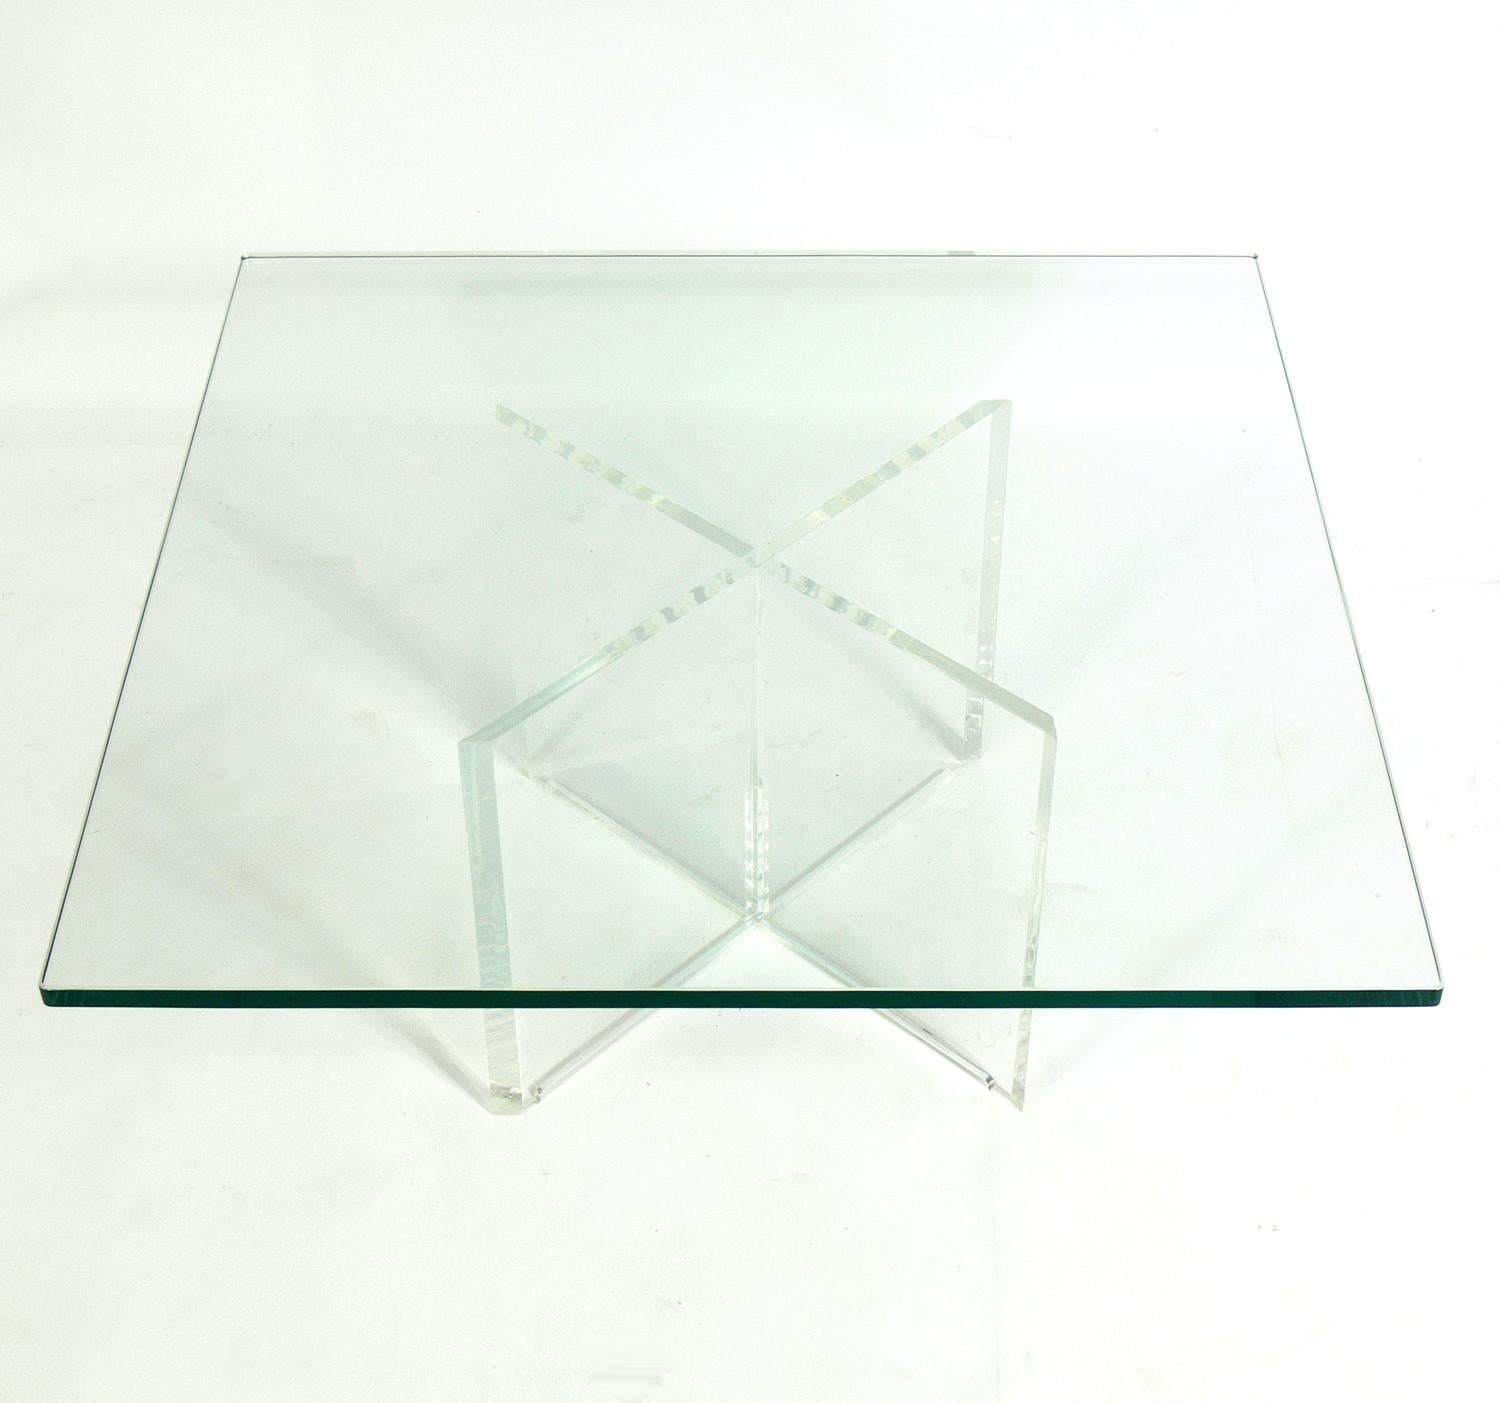 Lucite X-base coffee table, American, circa 1970s. It is well constructed with a chunky Lucite or acrylic X-form base and a thick glass top.